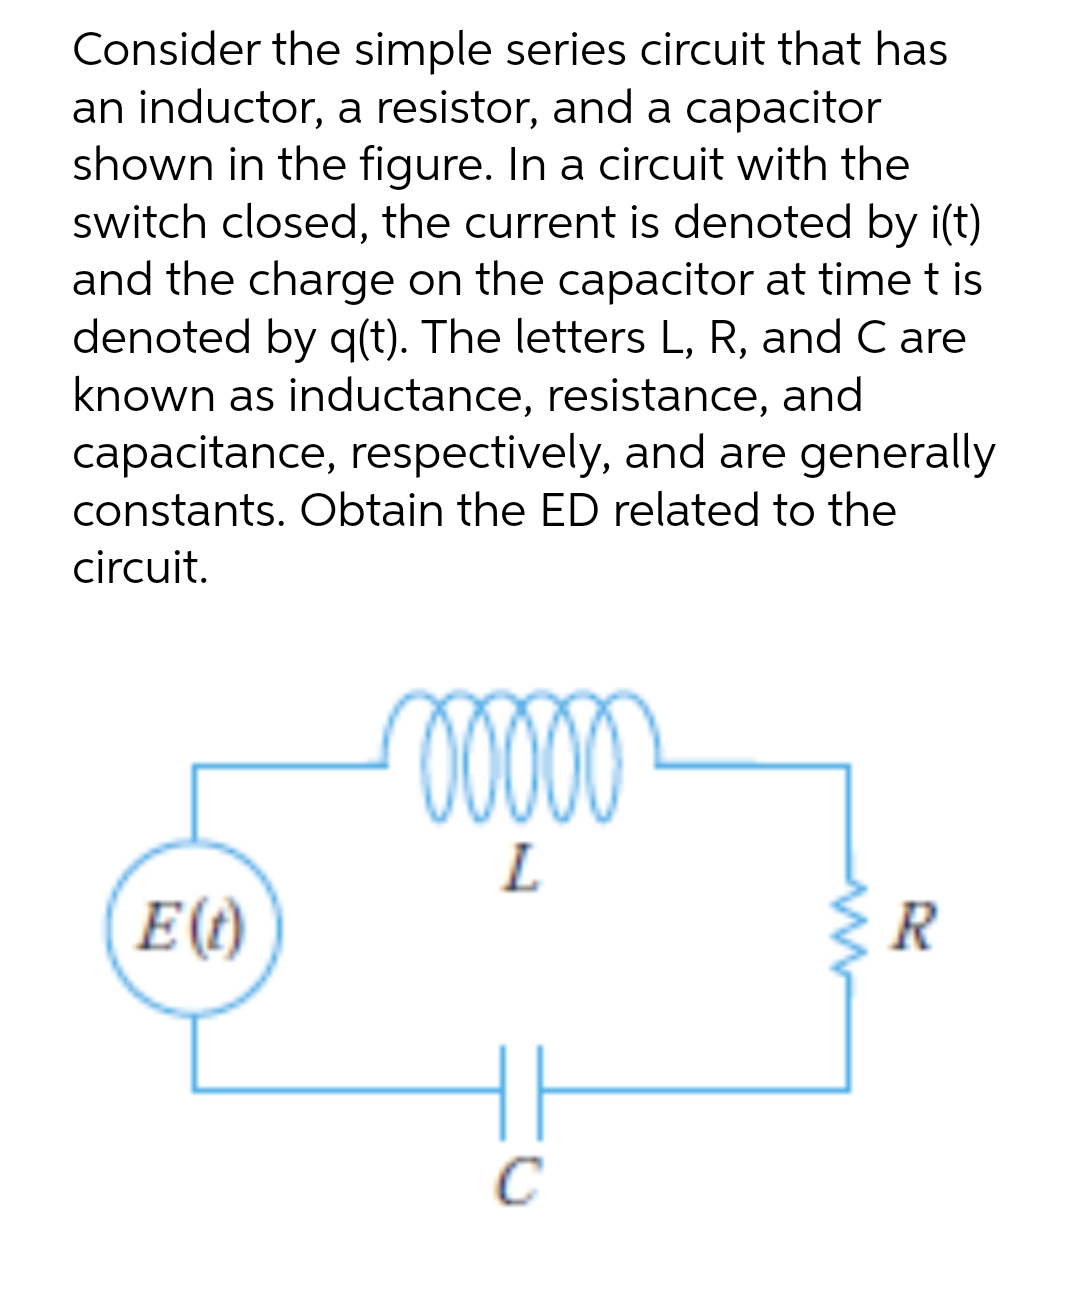 Consider the simple series circuit that has
an inductor, a resistor, and a capacitor
shown in the figure. In a circuit with the
switch closed, the current is denoted by i(t)
and the charge on the capacitor at time tis
denoted by q(t). The letters L, R, and Care
known as inductance, resistance, and
capacitance, respectively, and are generally
constants. Obtain the ED related to the
circuit.
E (t)
00000
L
C
R